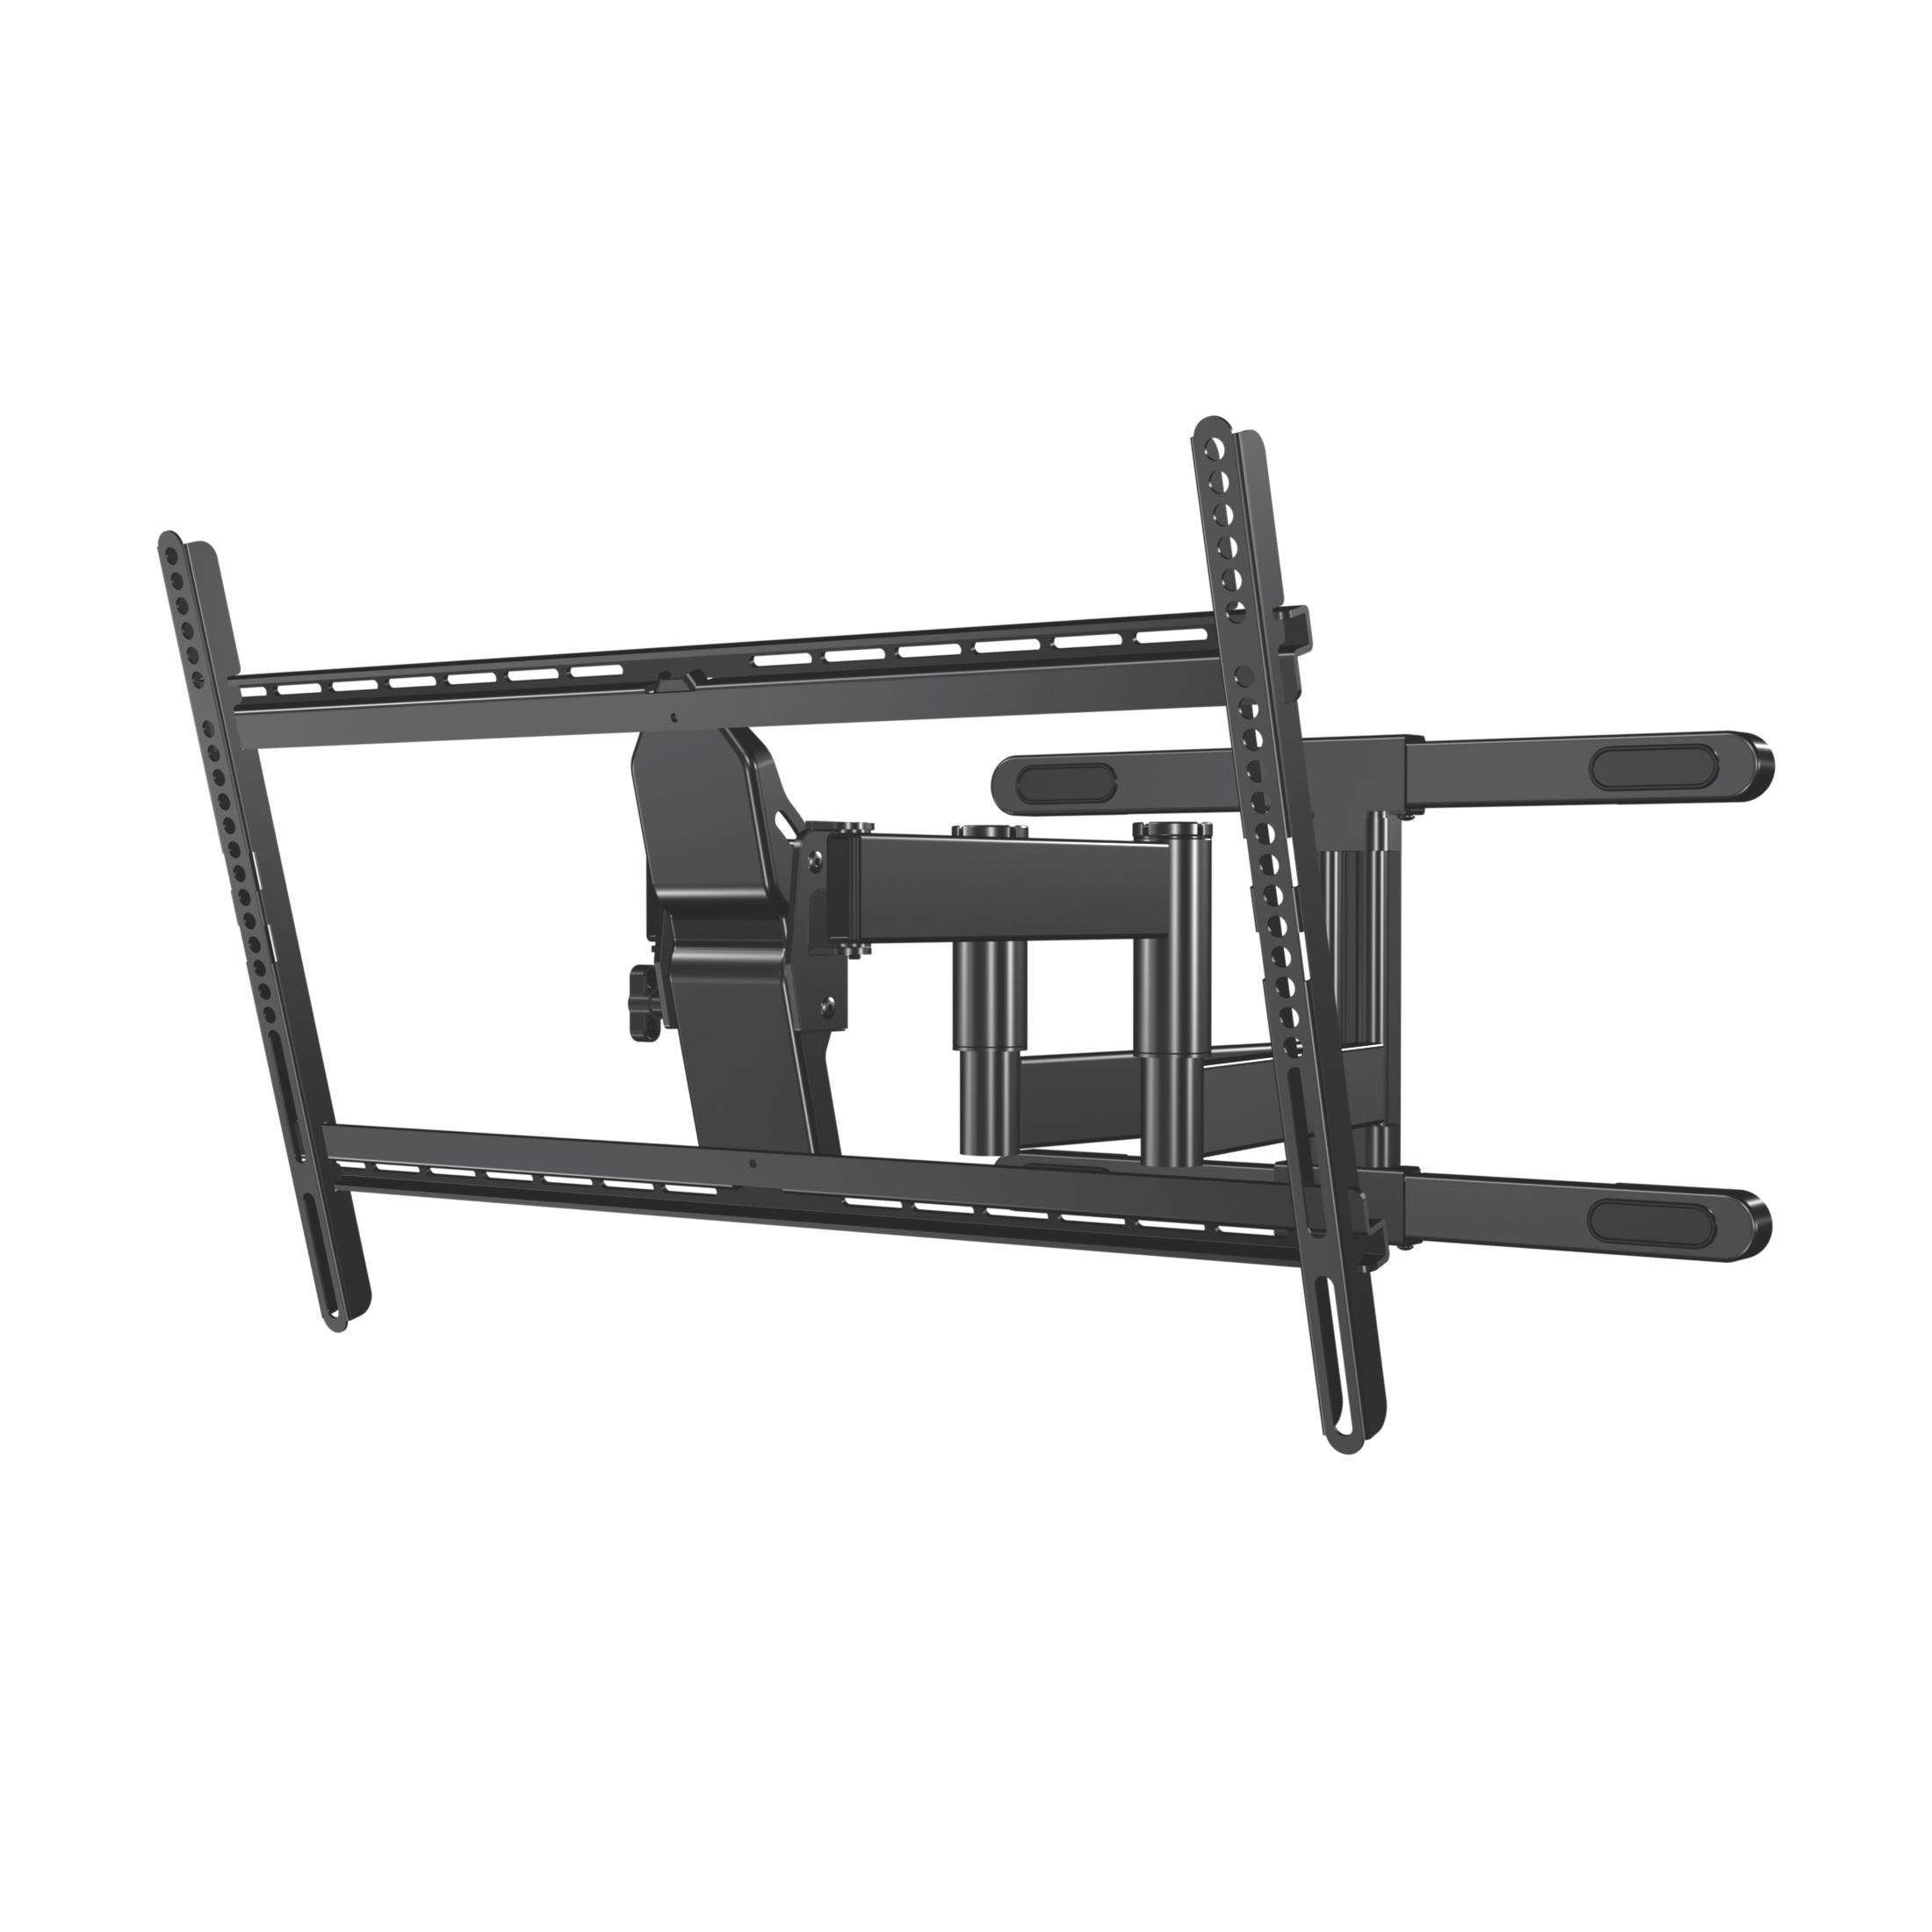 SANUS VuePoint Full-Motion TV Mount for TVs 42"-85" up to 120 lbs - image 3 of 14